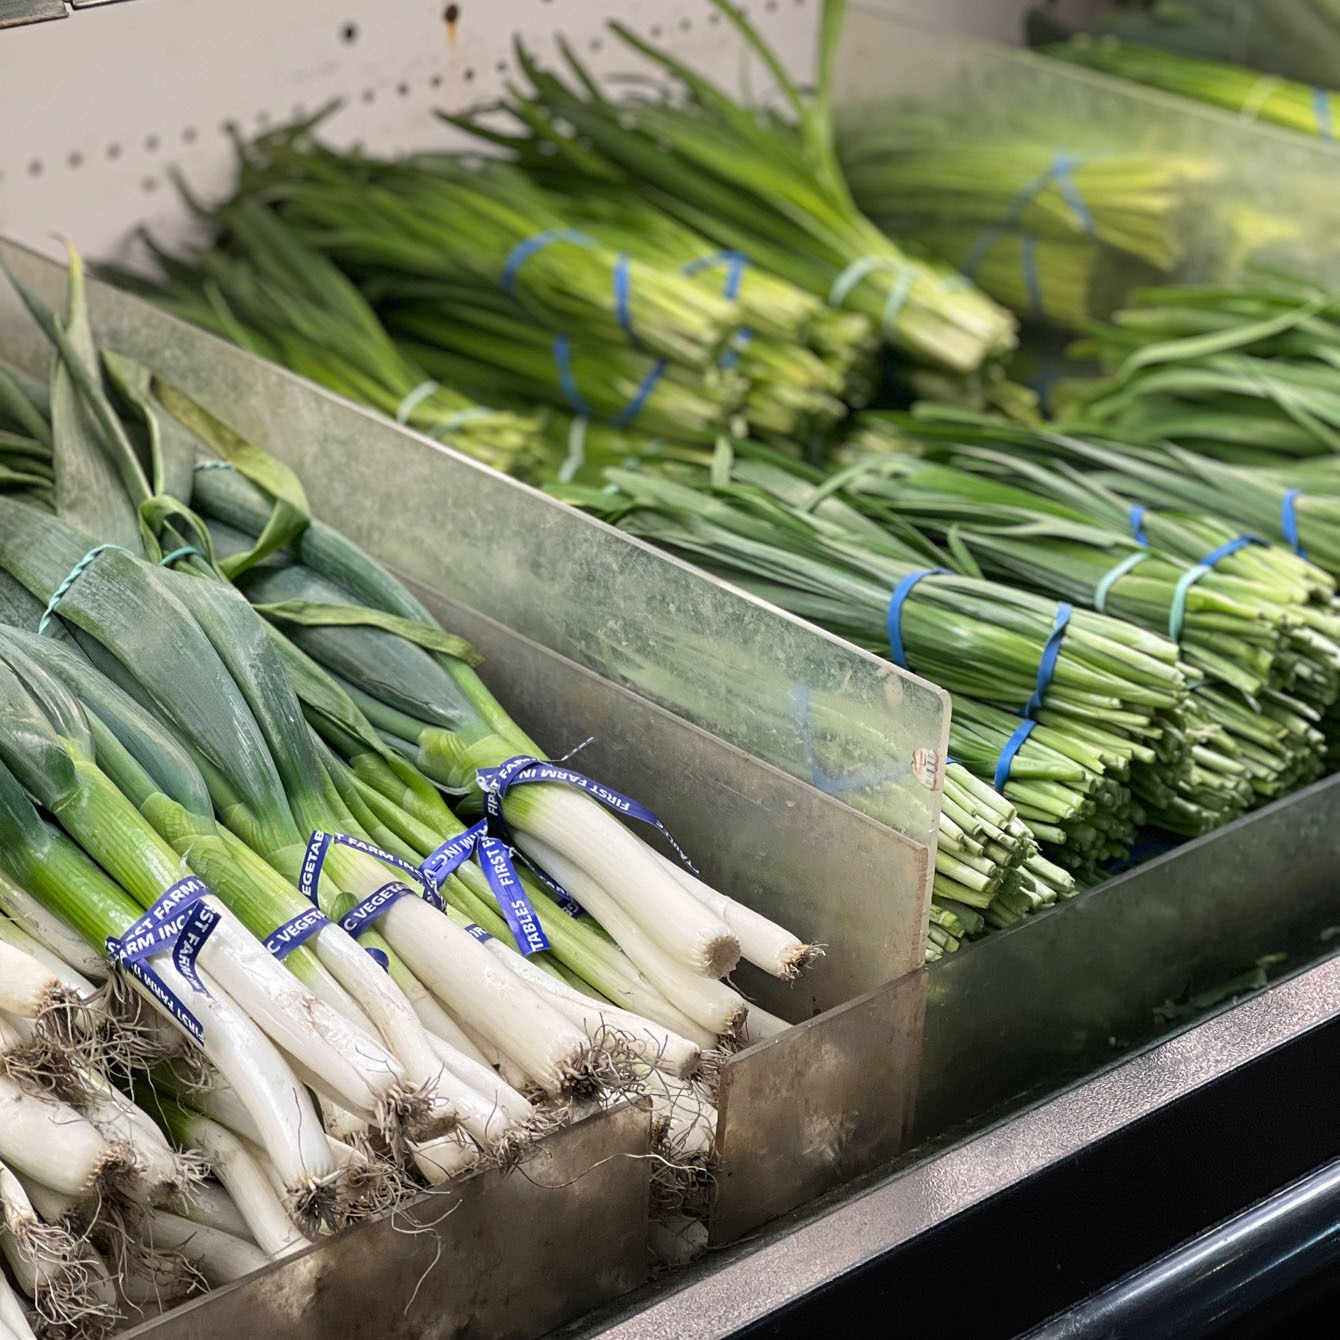 Asian leeks and chives used in Korean cuisine.